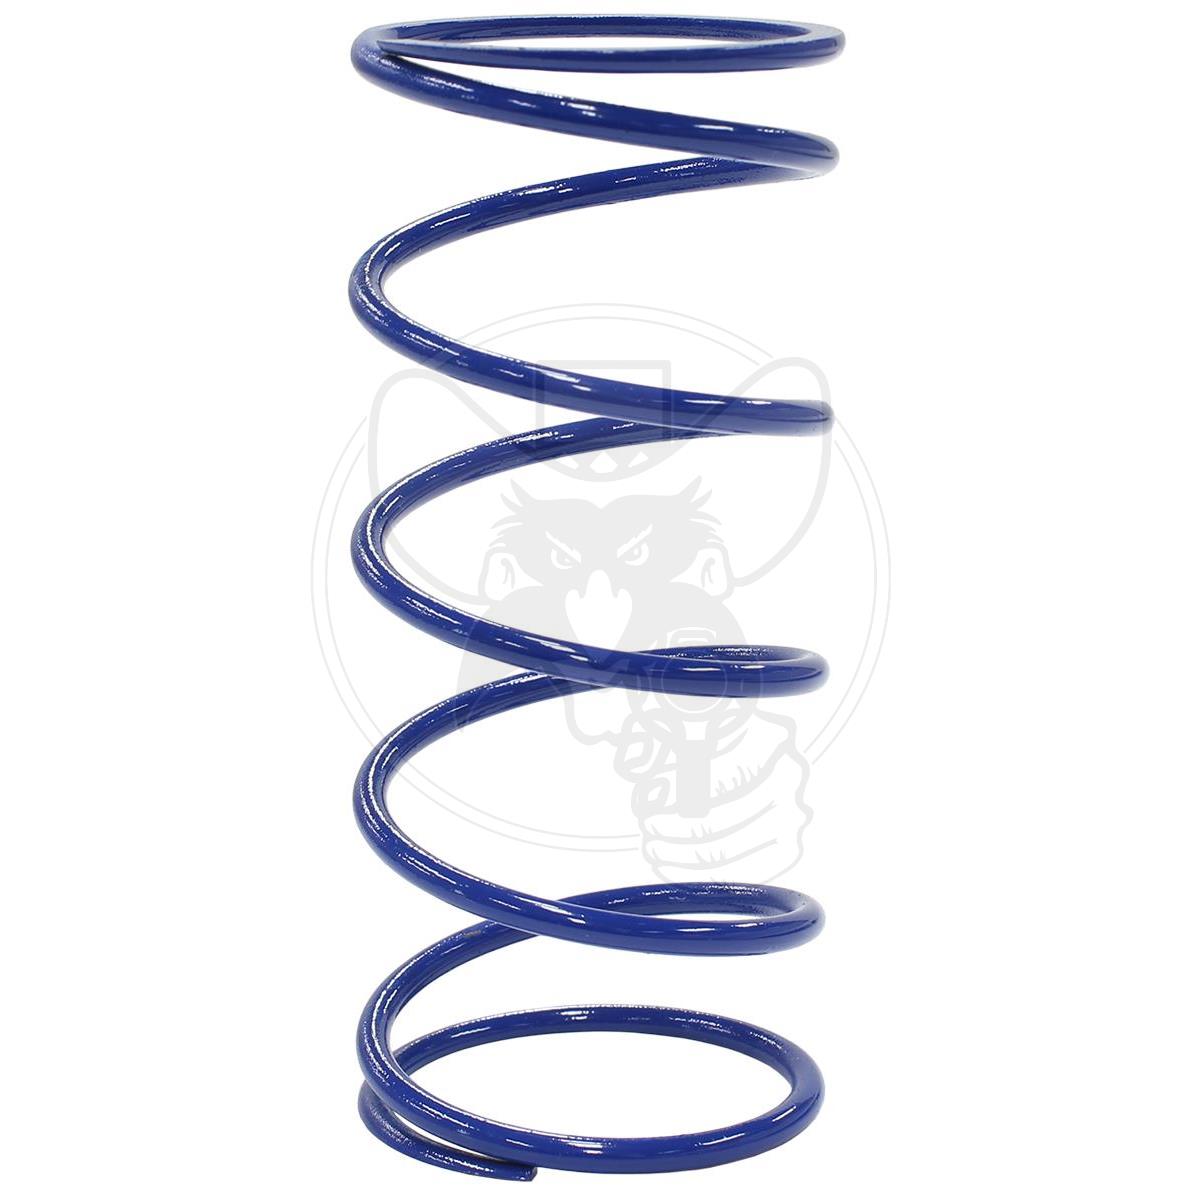 AEROFLOW WASTEGATE MIDDLE SPRING FROM 7.2 PSI (0.45 BAR) - BLUE